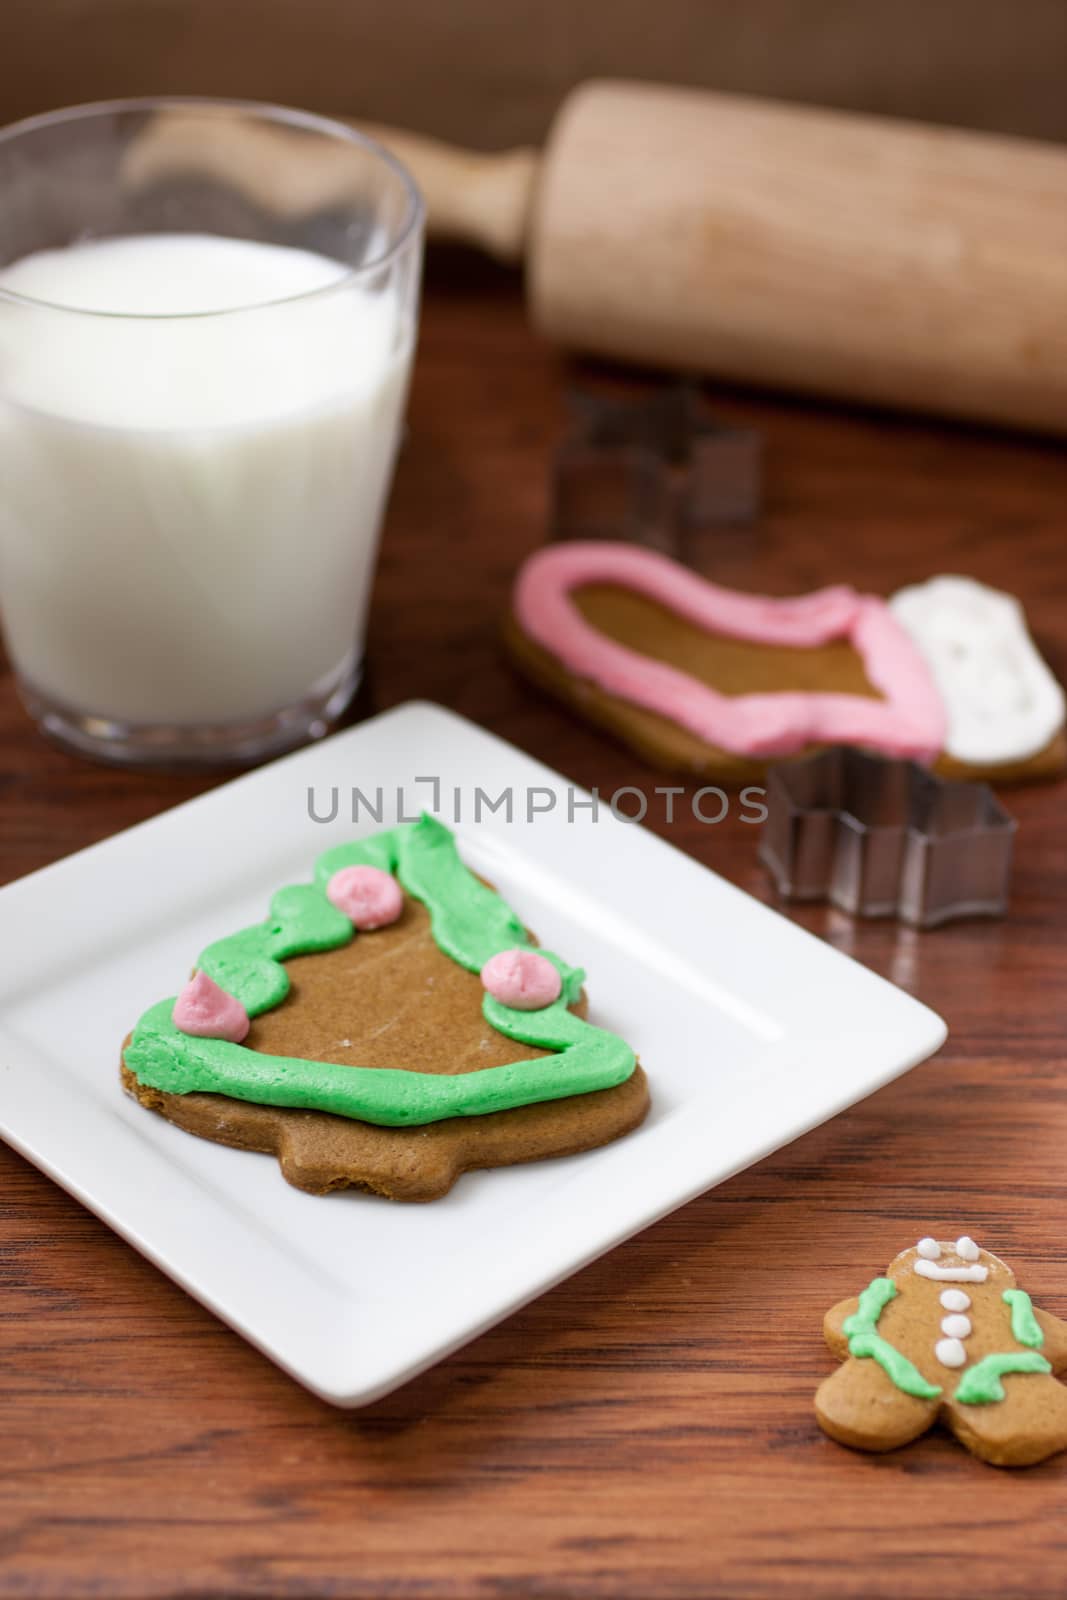 Several gingerbread Christmas cookies on a white plate with cookie cutters, a rolling pin, and several cookies in the background.